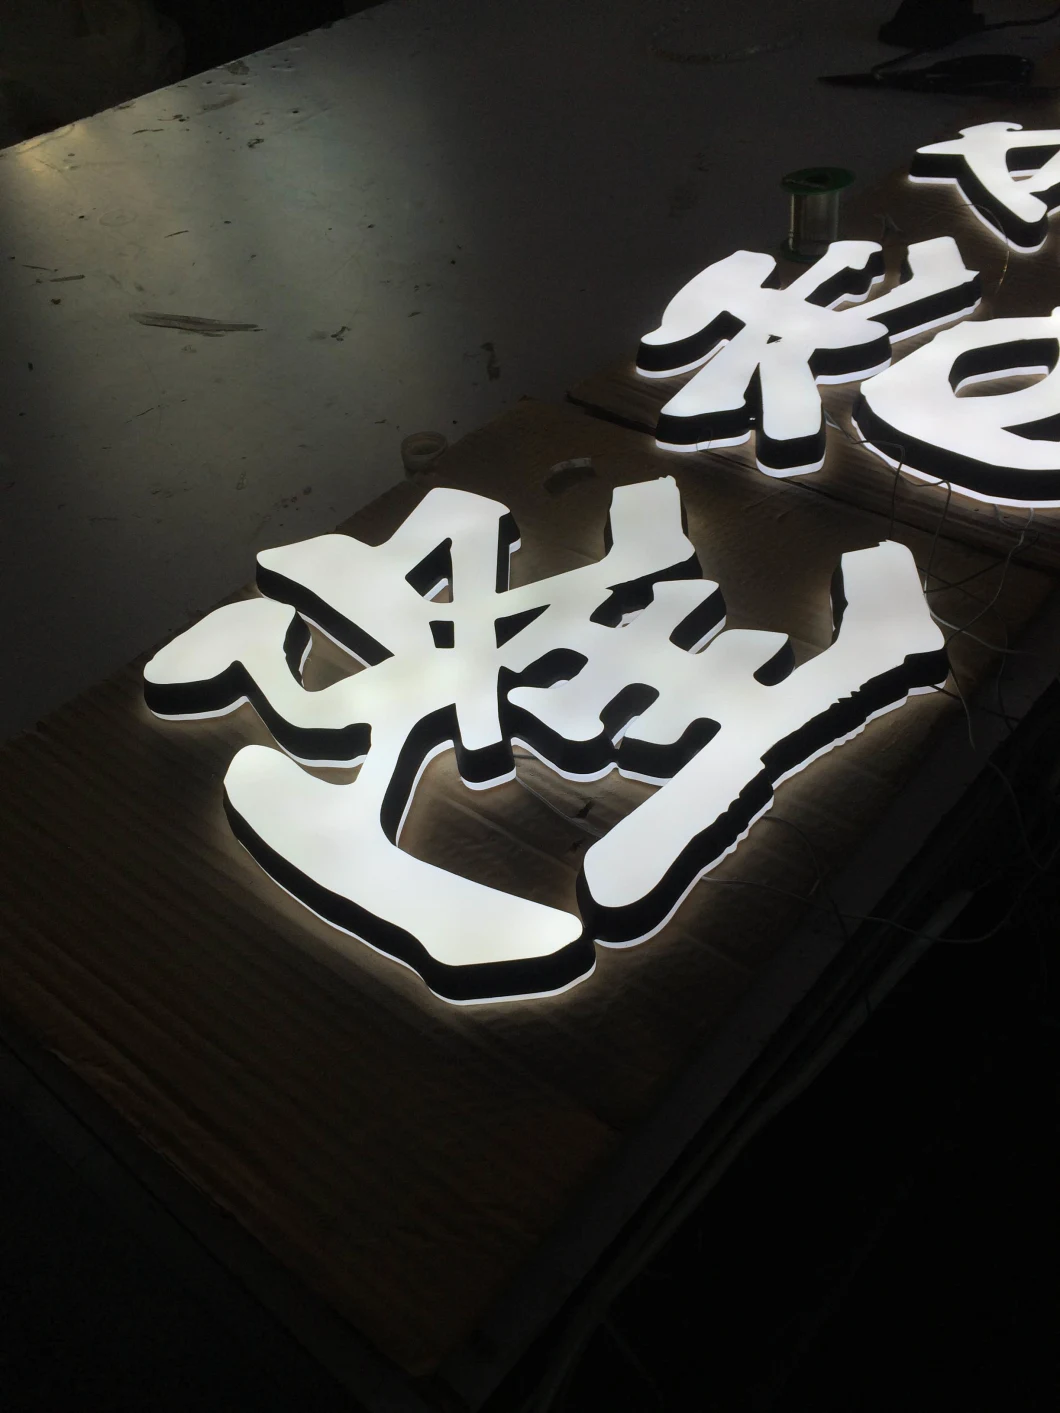 20mm Opal White Cast Perspex Illuminated Acrylic Sheet for LED Sign or Other Appliocations